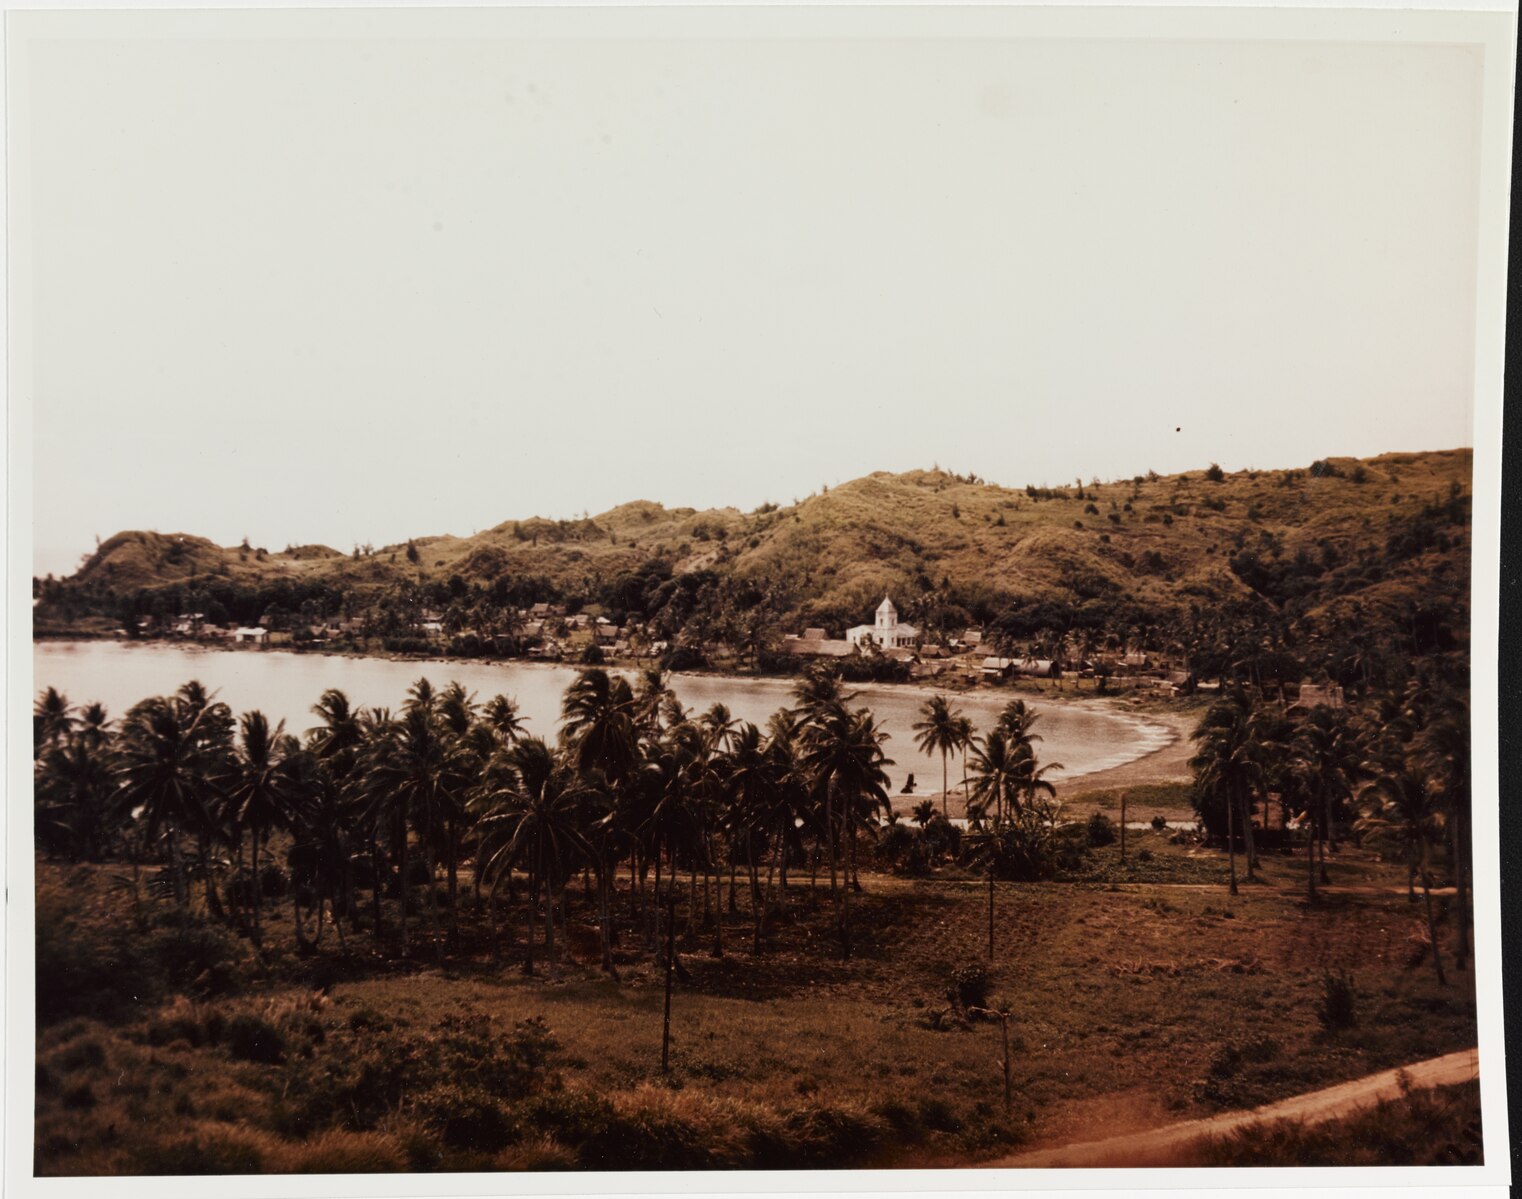 A sepia-toned photograph of Humåtak Bay and Village in Guåhan. The photo shows water surrounded by hills and palm trees and the town.